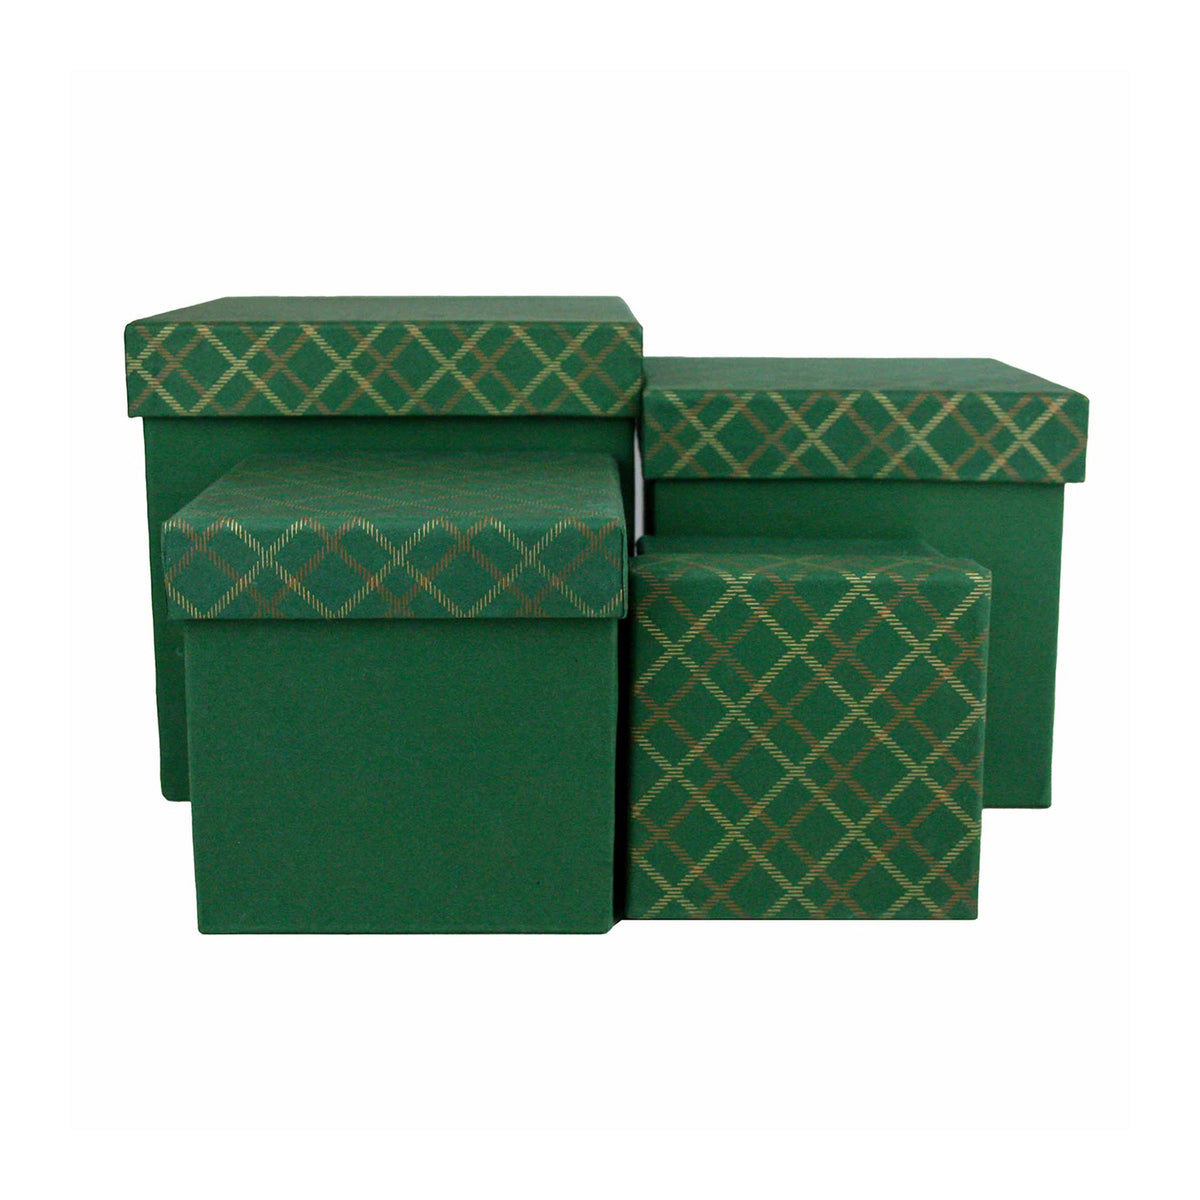 Handcrafted Chequered Green Gift Boxes  - Set of 4 (Sizes Available)